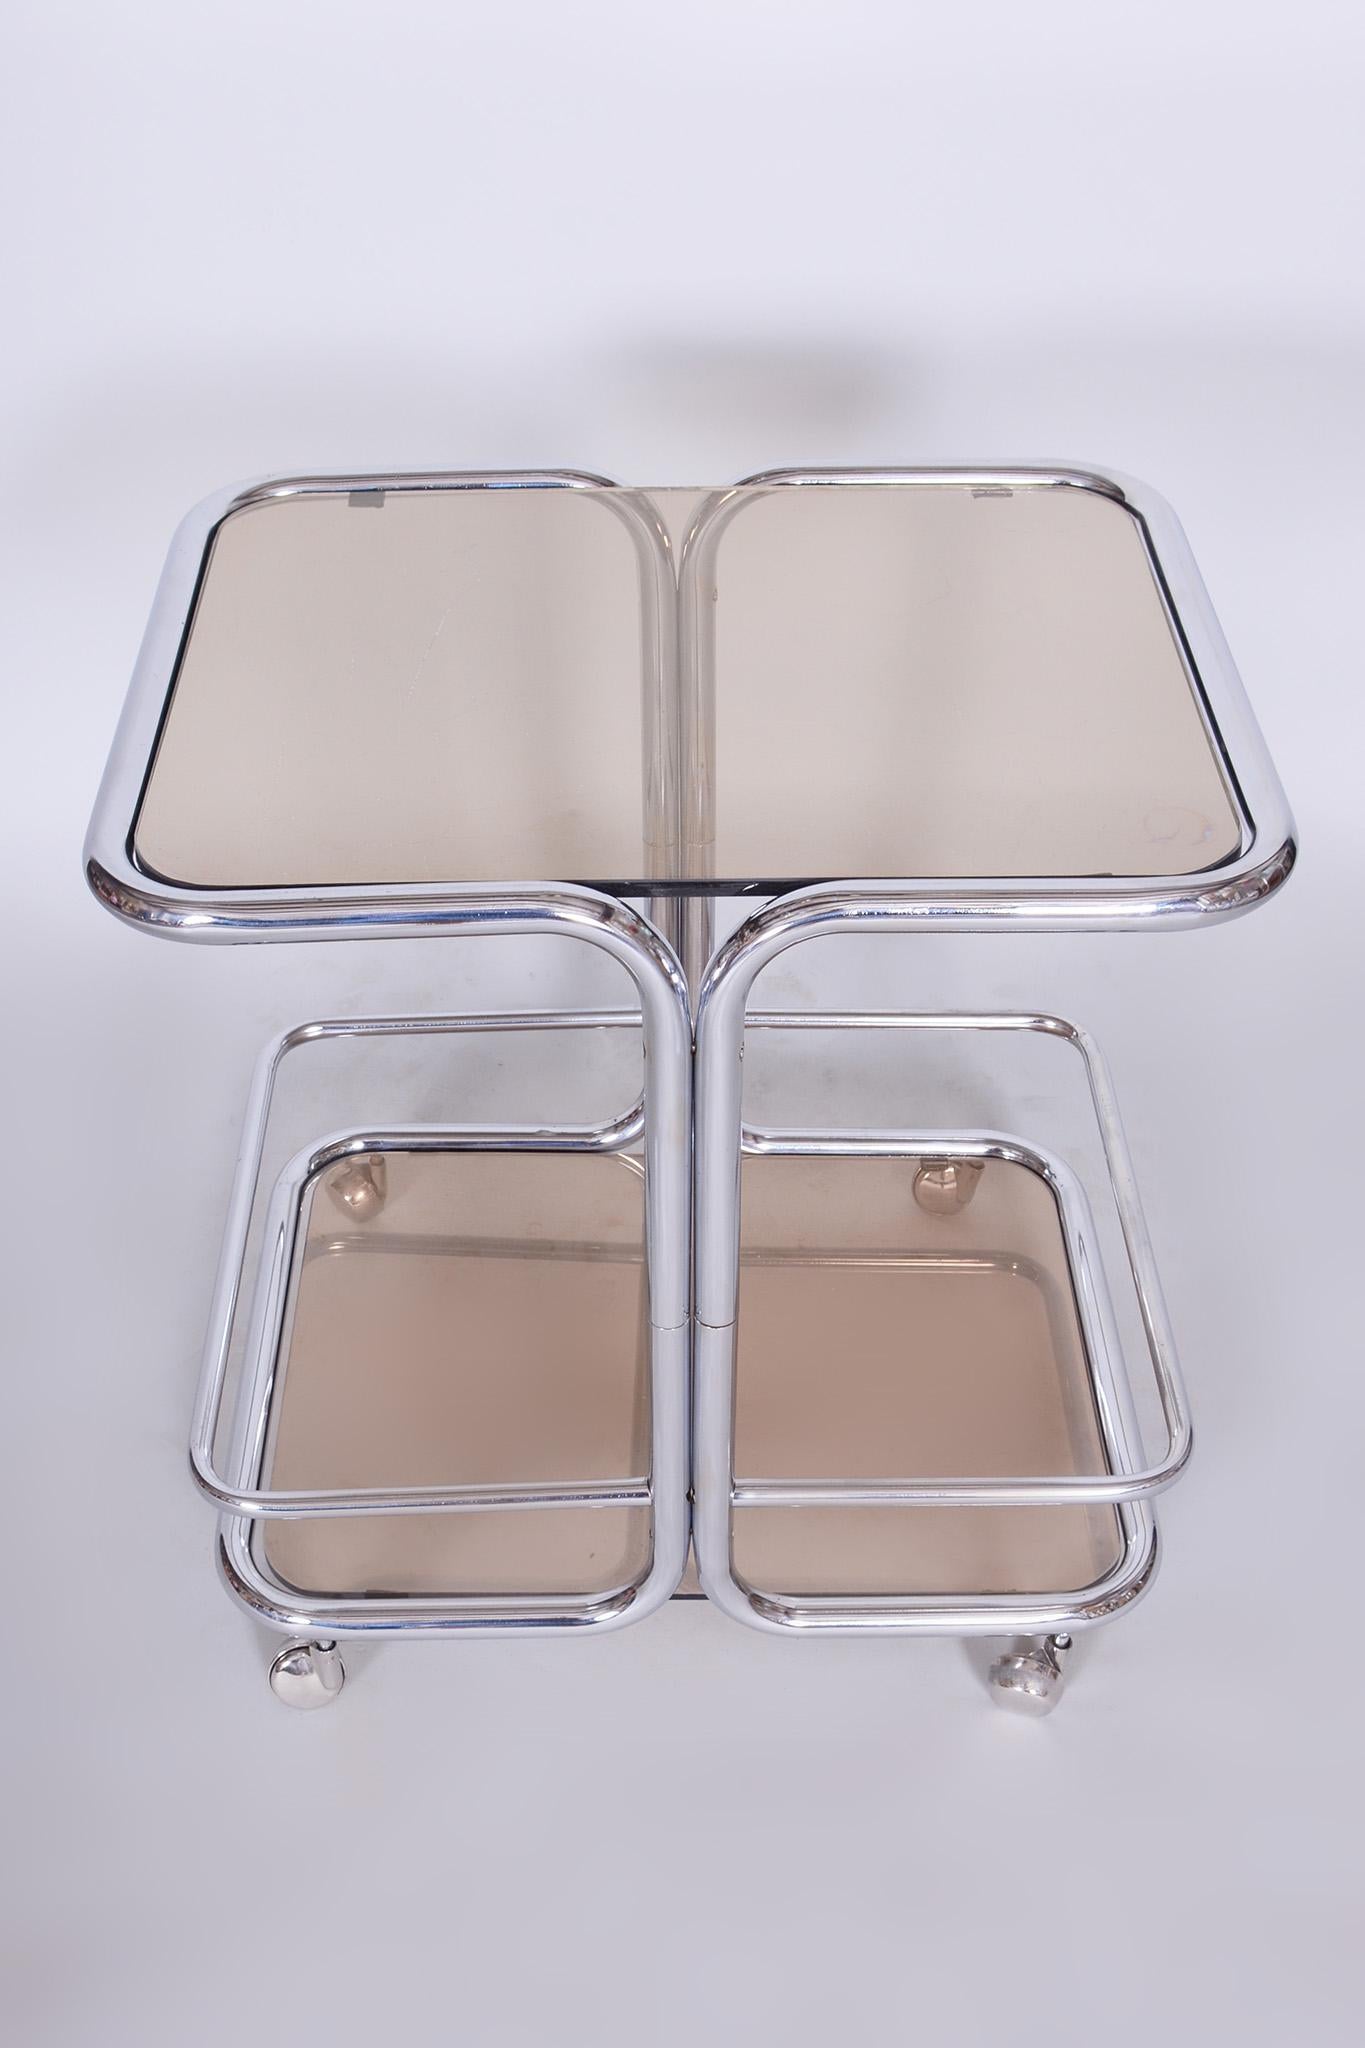 Original Midcentury Chrome Serving Trolley, Smoked Glass, 1960s, Czechia In Good Condition For Sale In Horomerice, CZ